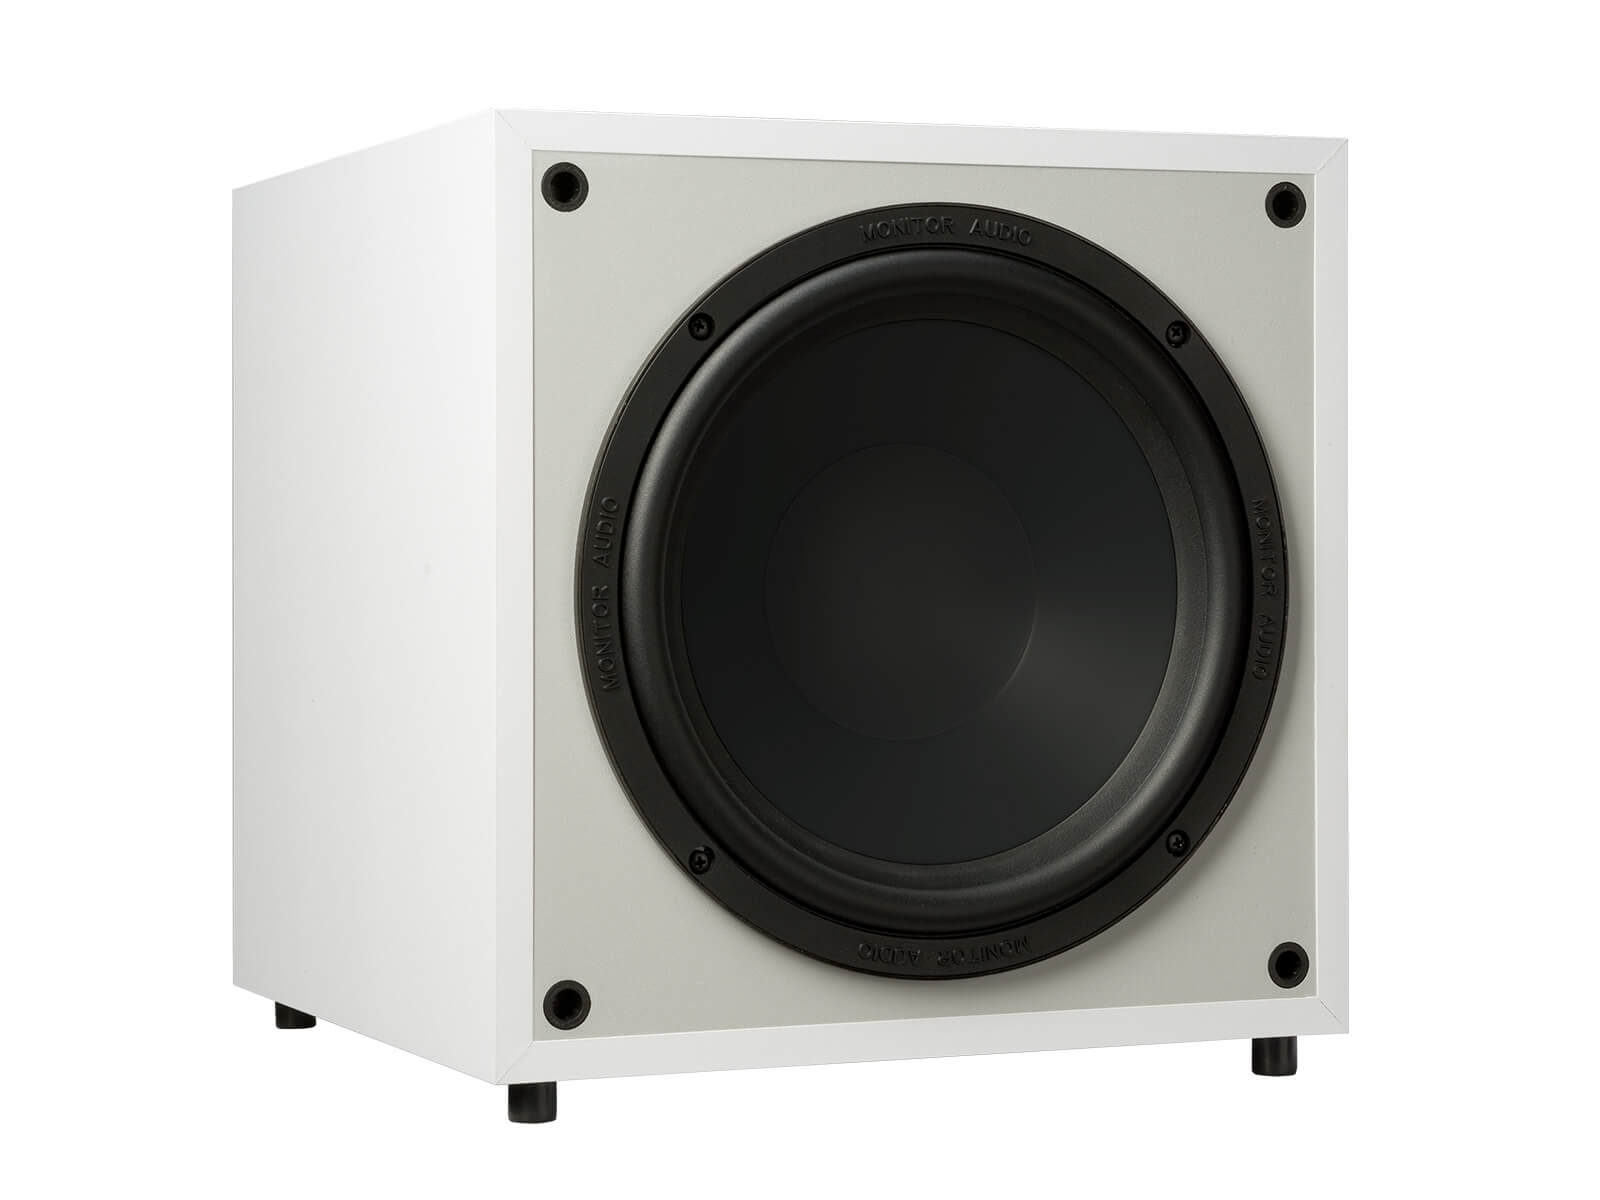 Monitor MRW-10, grille-less subwoofer, with a white finish.